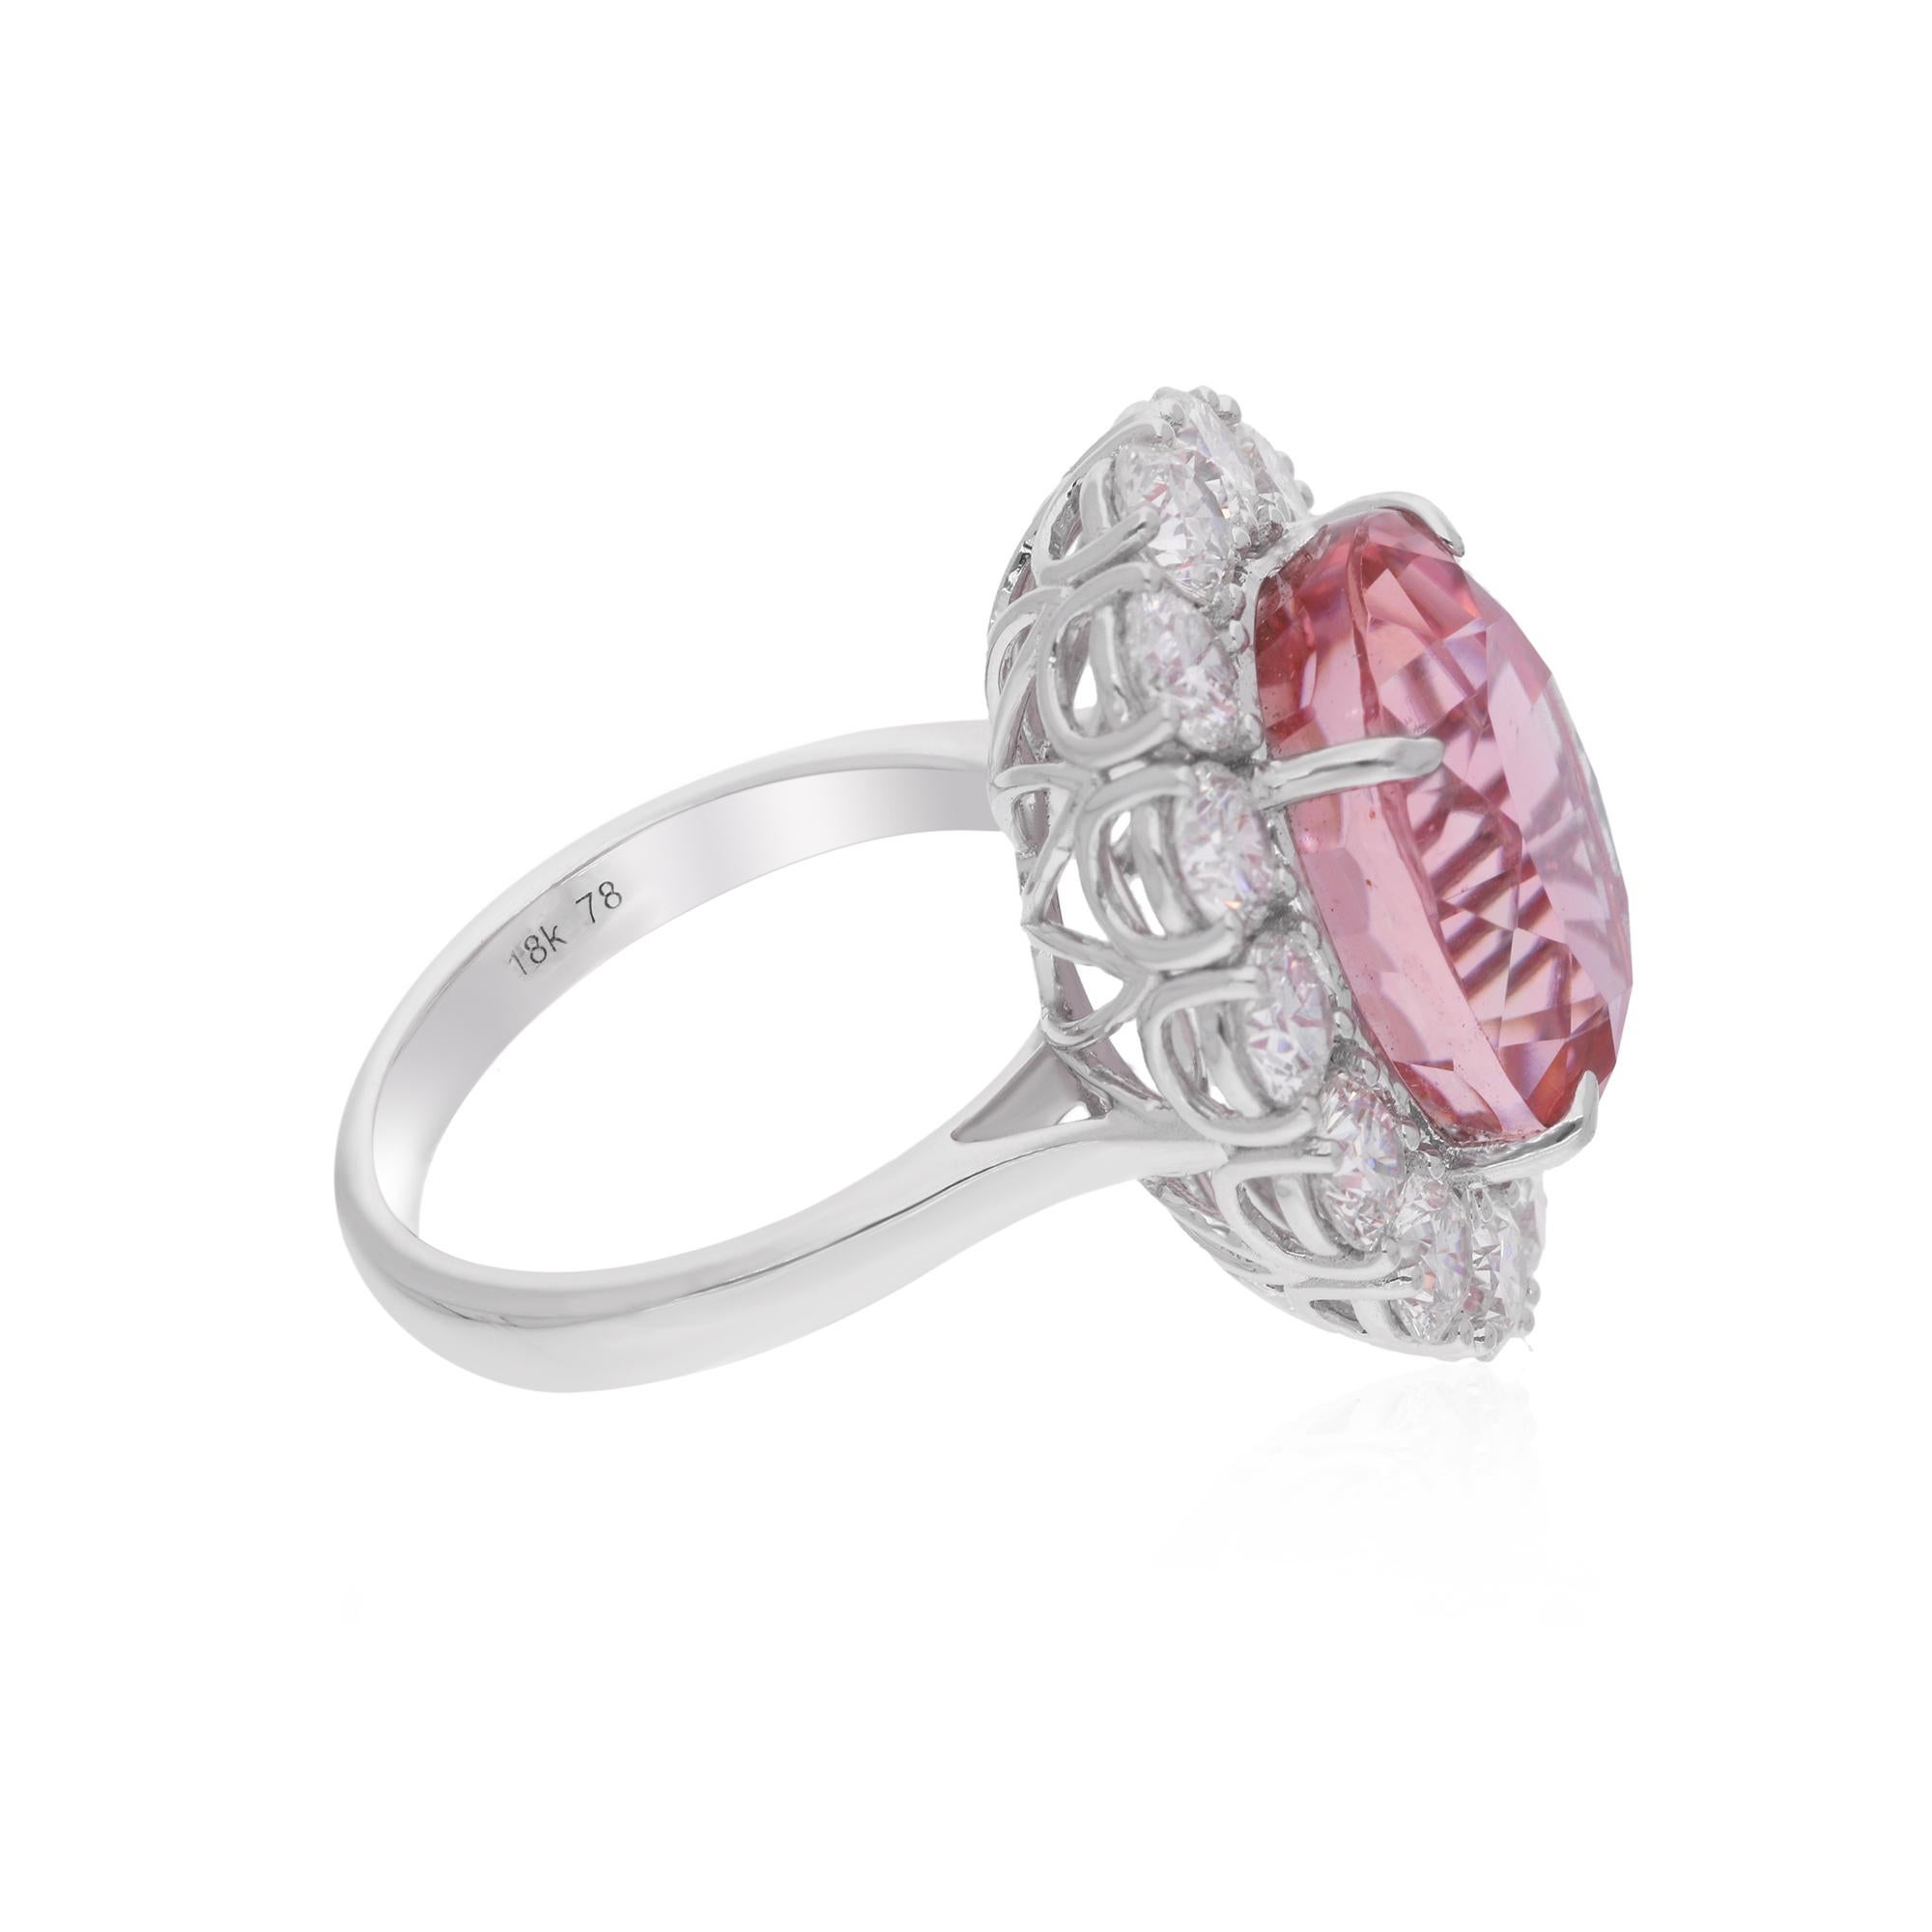 Indulge in the exquisite charm of this Oval Pink Tourmaline Gemstone Cocktail Ring, adorned with shimmering Diamonds and meticulously crafted in luxurious 18 Karat White Gold. This stunning piece of fine jewelry is a celebration of femininity and